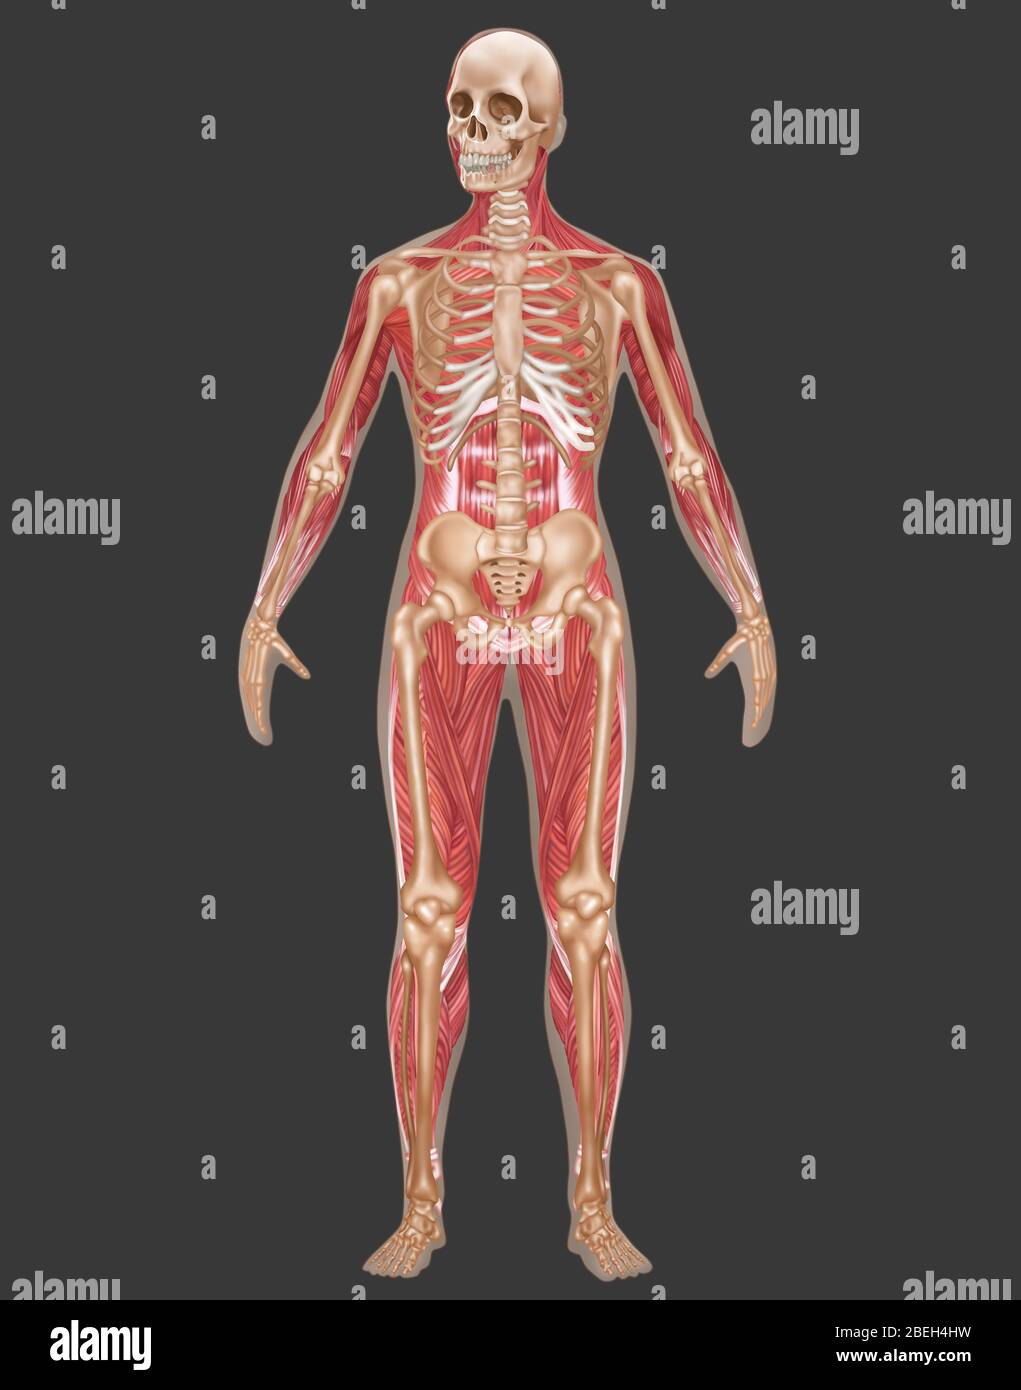 Skeletal & Muscular Systems, Female Anatomy Stock Photo